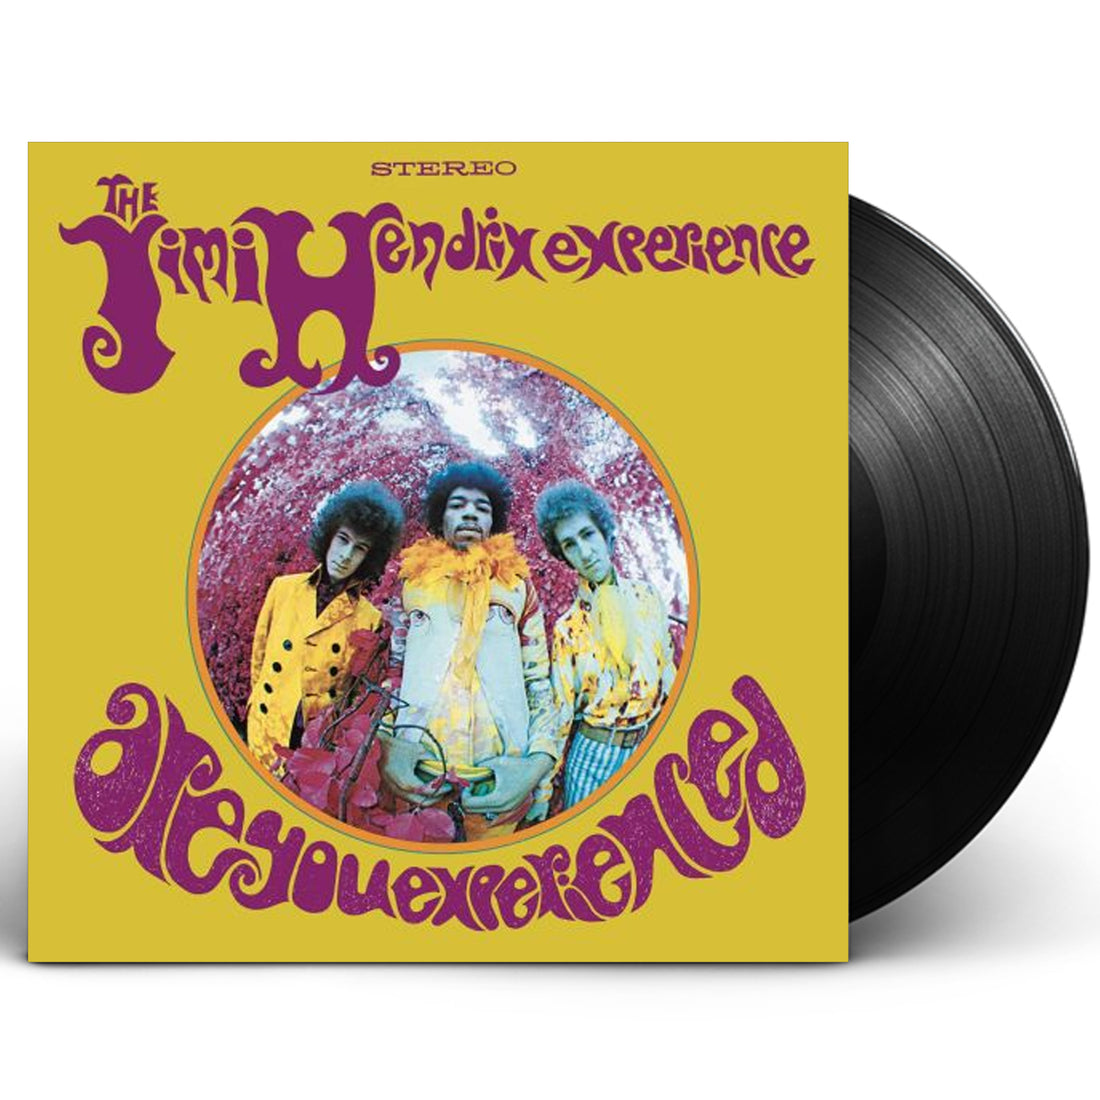 The Jimi Hendrix Experience "Are You Experienced" LP Vinyl